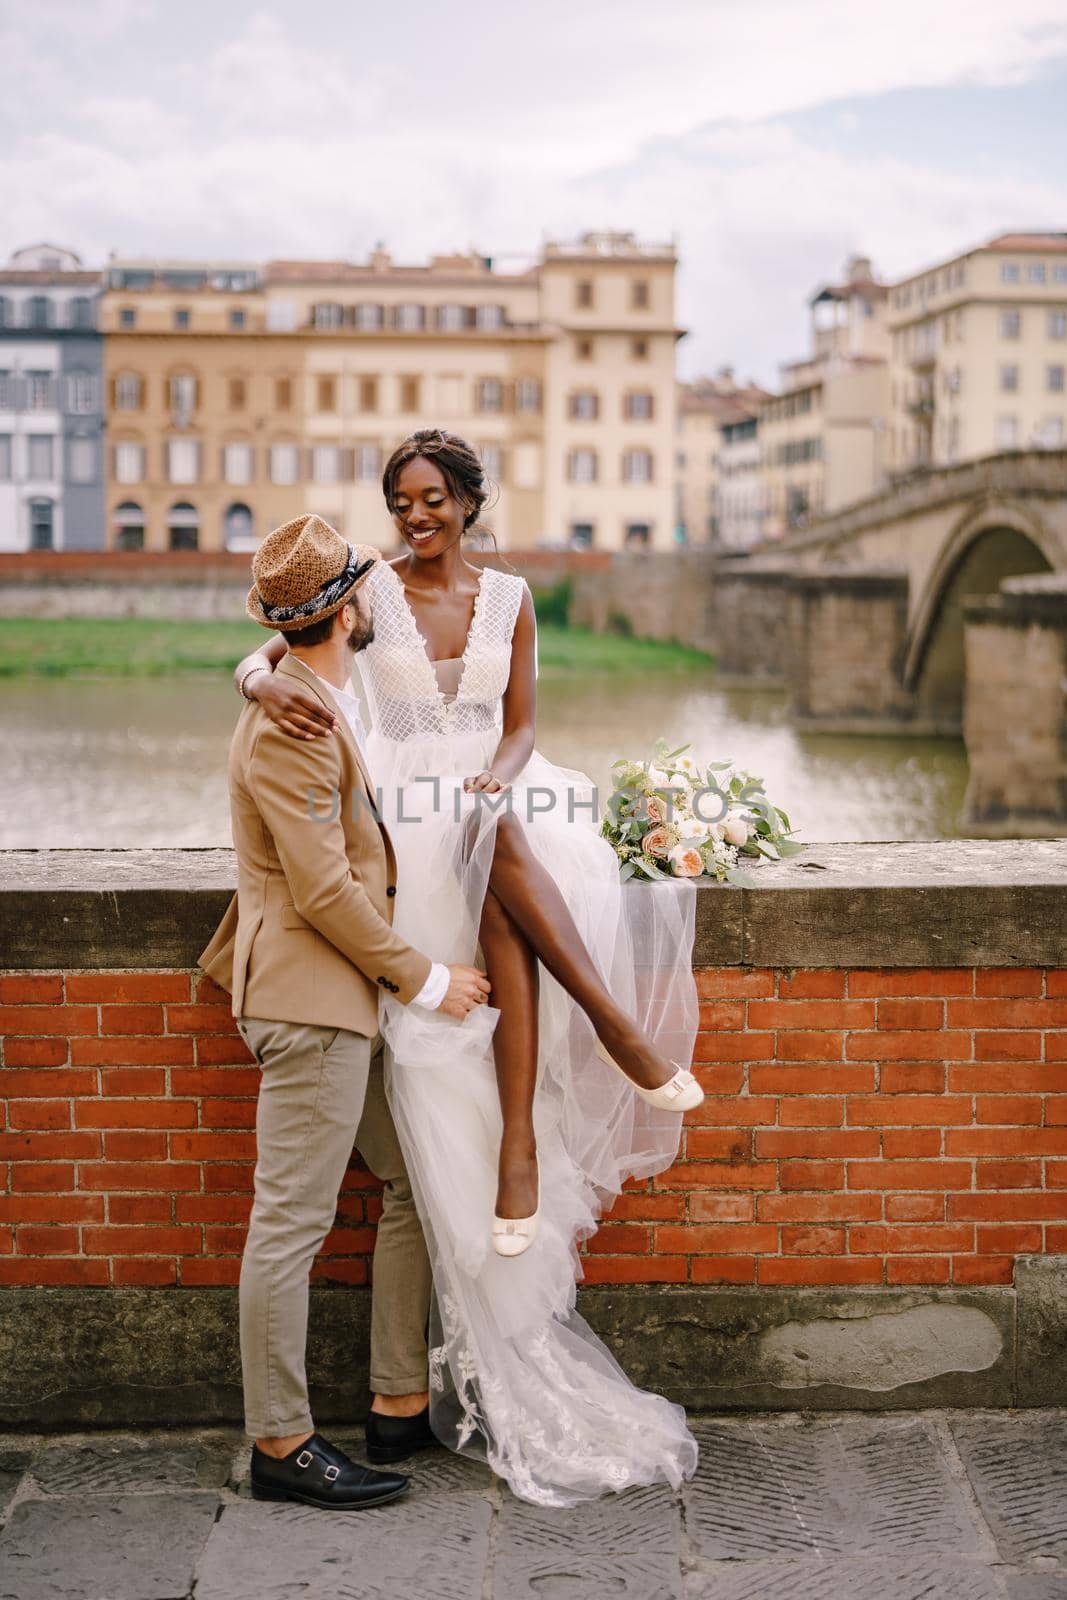 Interracial wedding couple. Wedding in Florence, Italy. An African-American bride is sitting on a brick wall and Caucasian groom is hugging her. Arno River Embankment, overlooking city and bridges by Nadtochiy